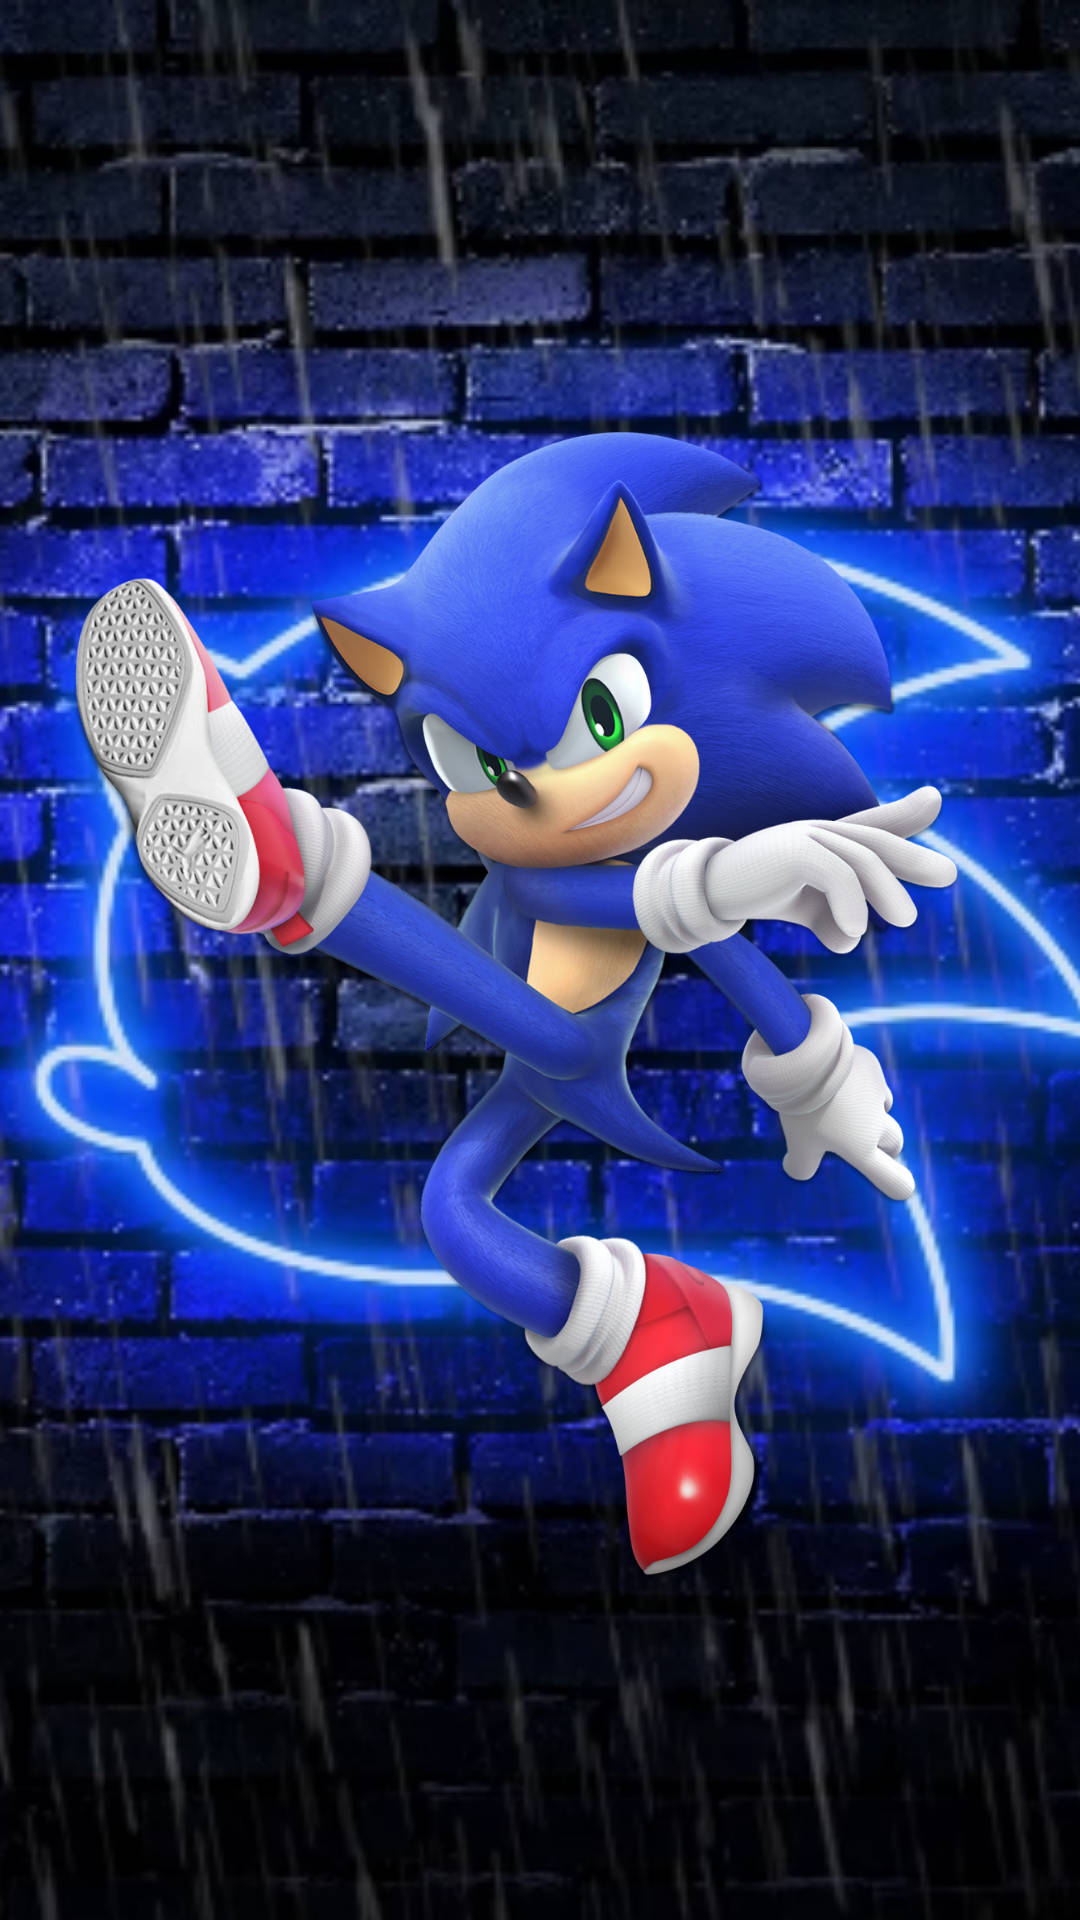 Speed up and beat the competition with Cool Sonic technology! Wallpaper